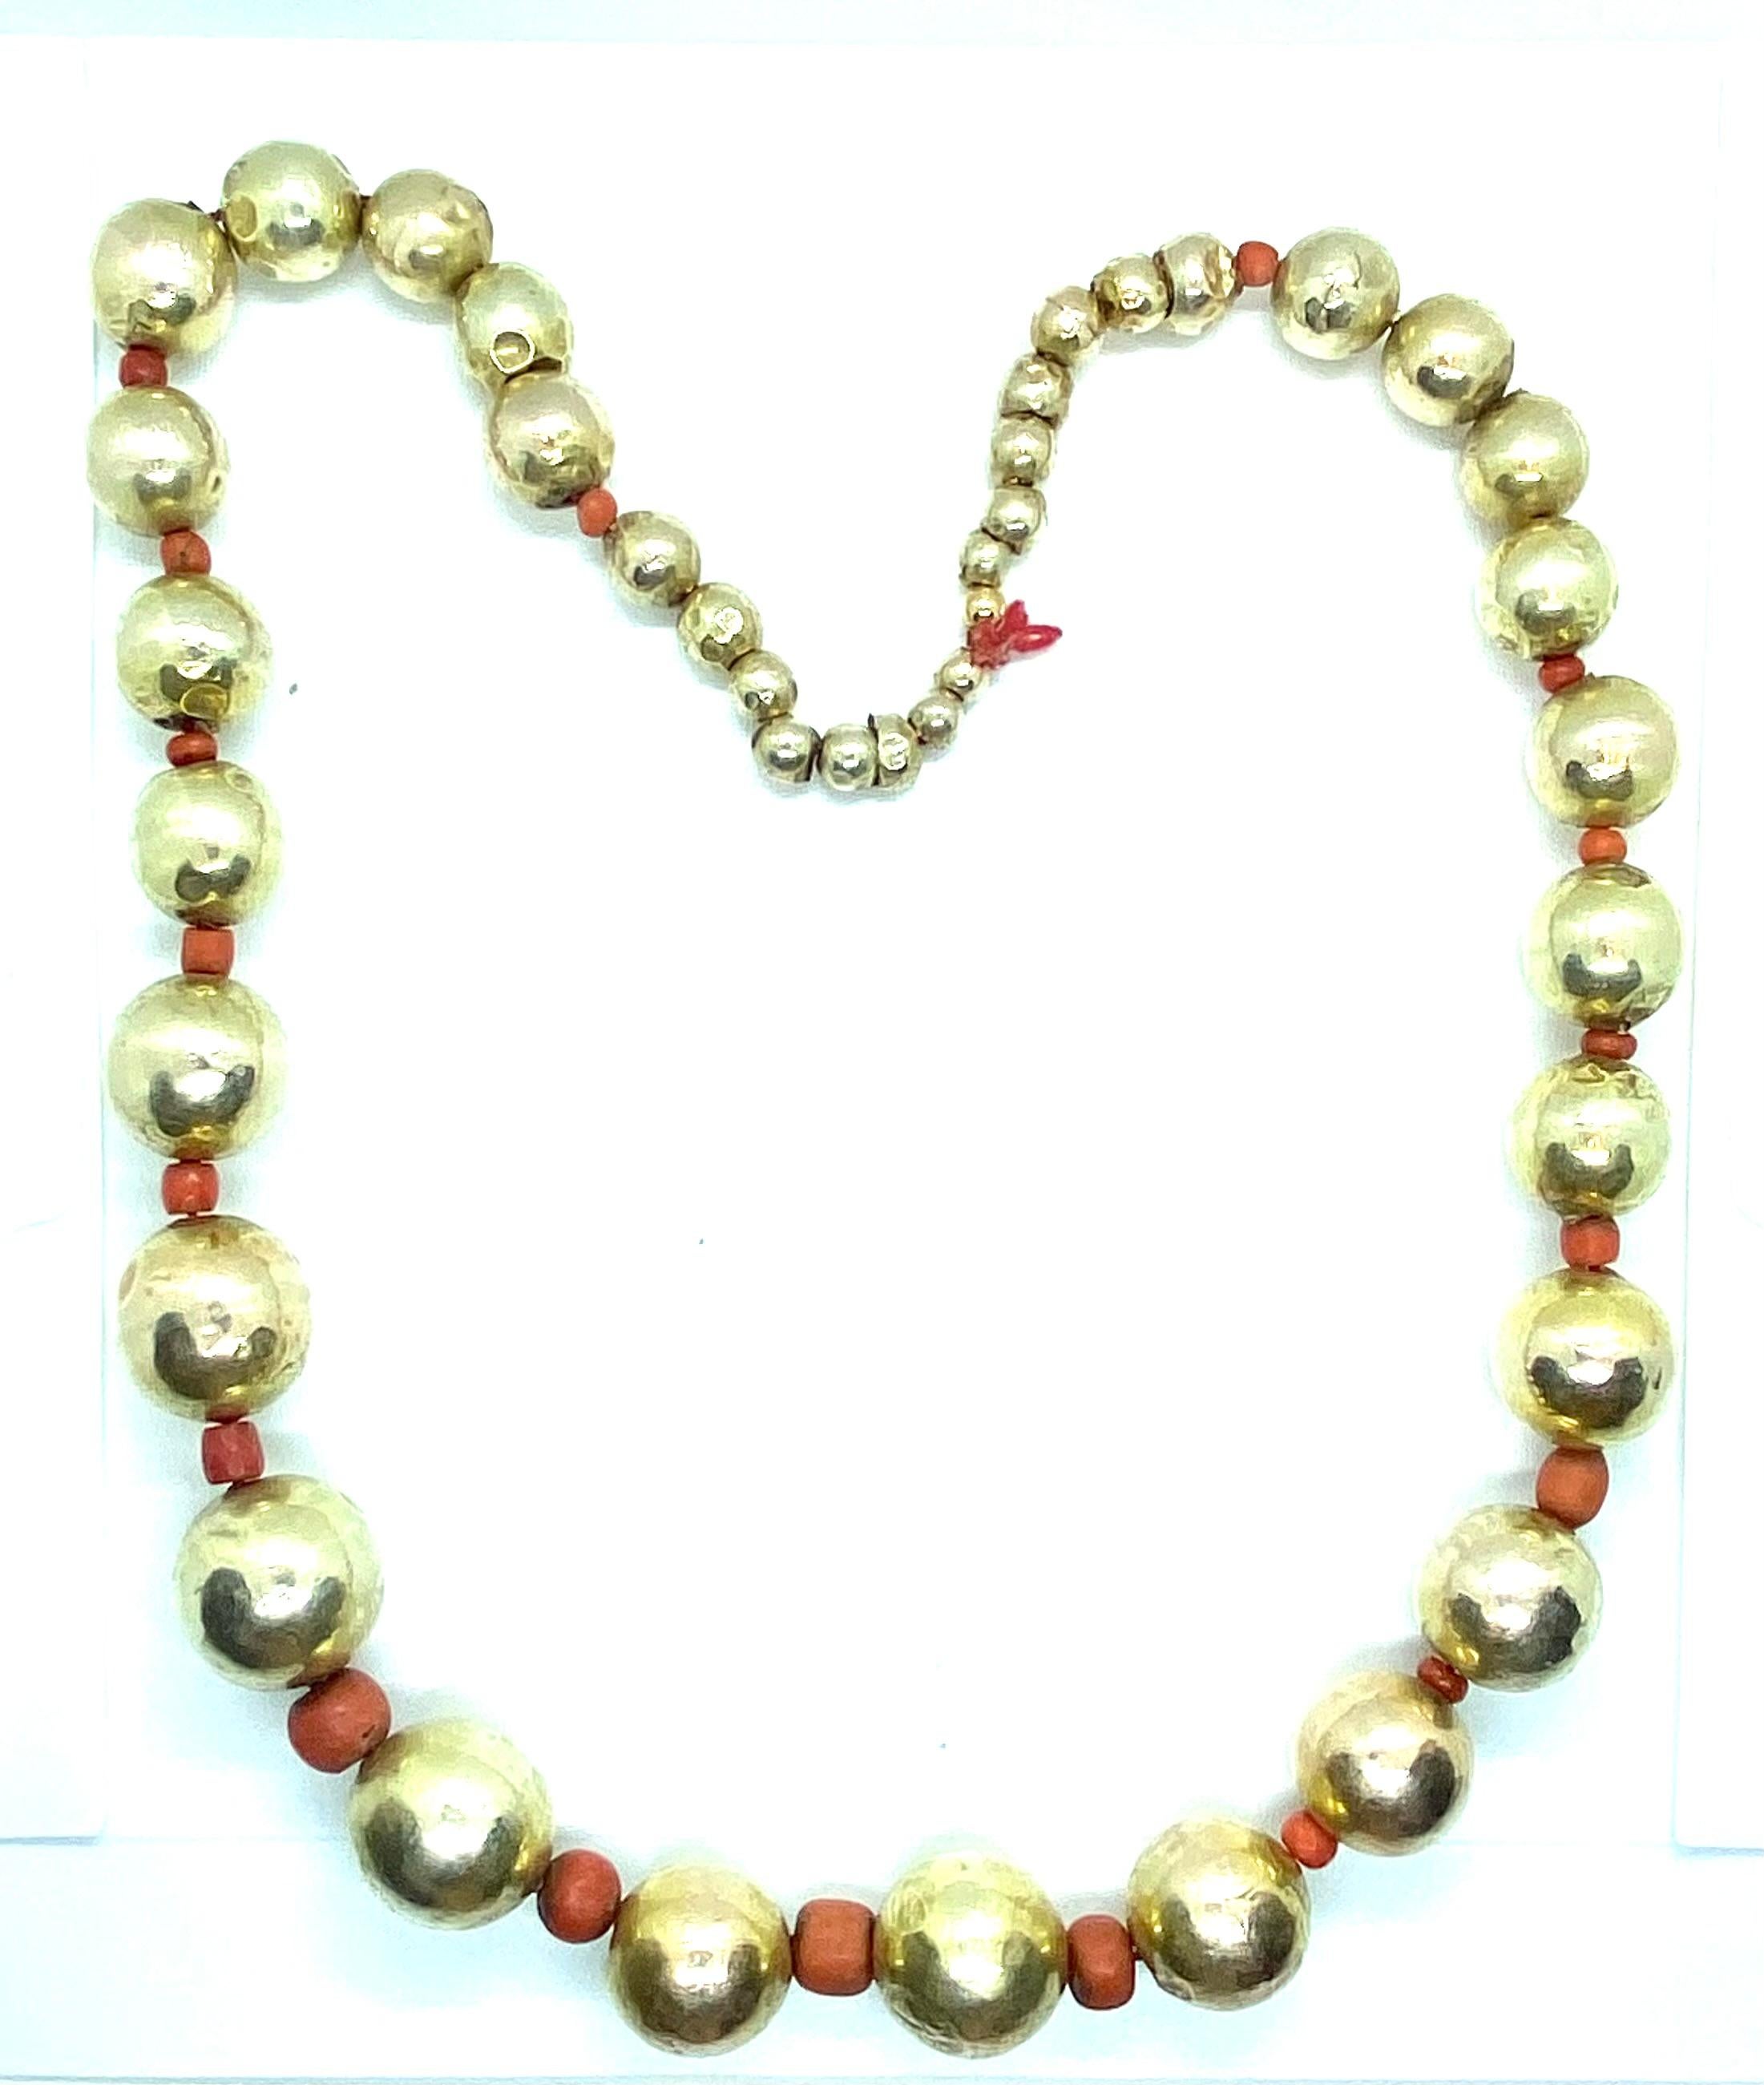 Women's or Men's Exceptional Gold Spheres Necklace from the XVIIIth Century For Sale